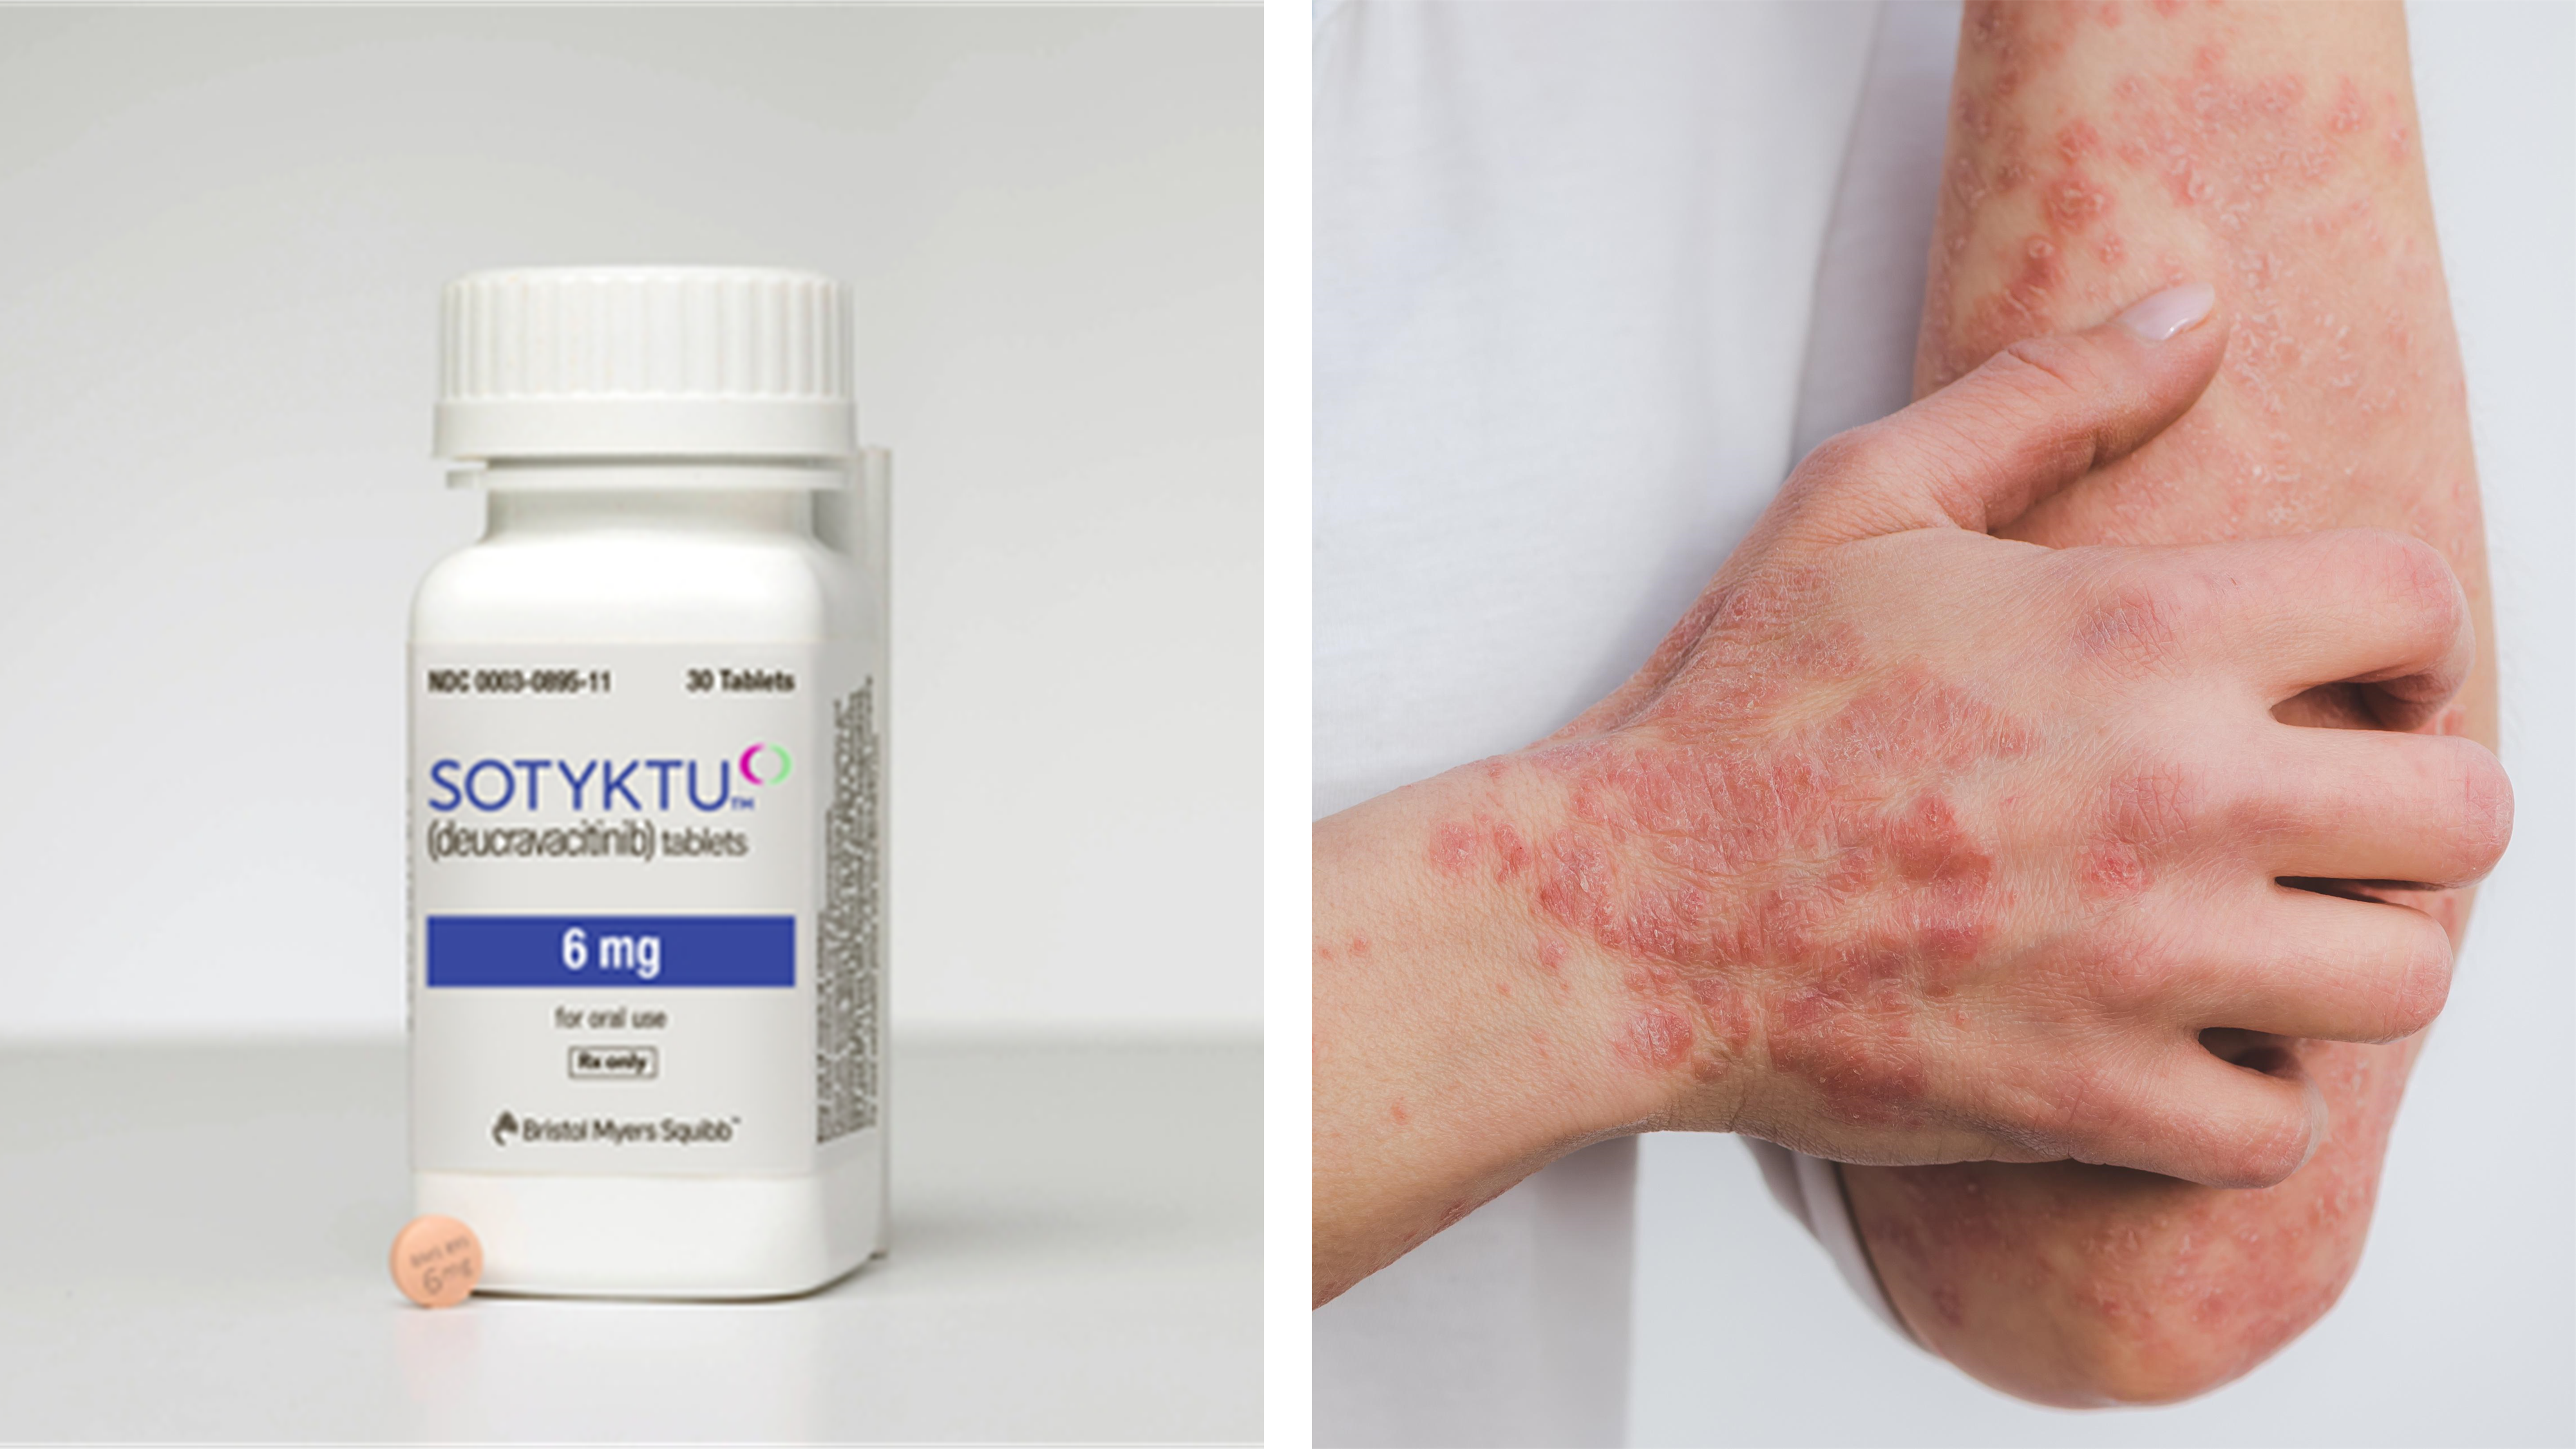 Sotyktu (deucravacitinib) Gets FDA Approval for Moderate-to-Severe Plaque Psoriasis